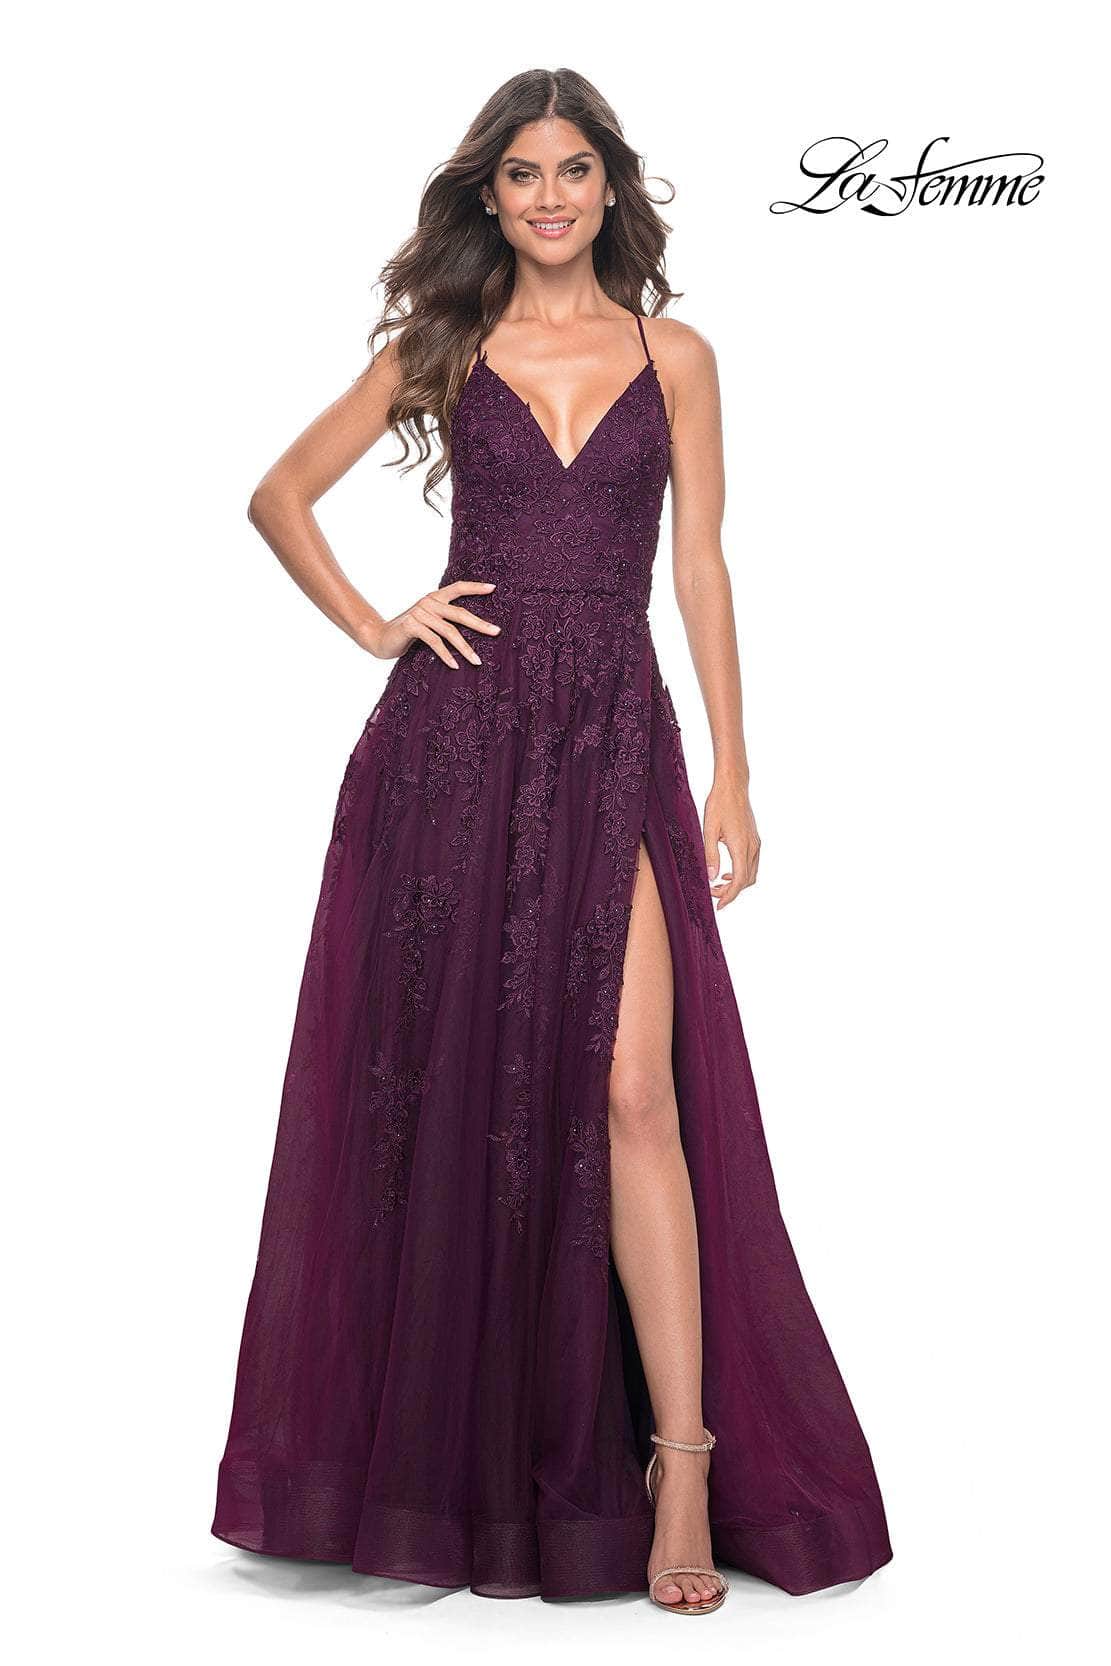 La Femme 32303 - V-Neck Embroidered Tulle Prom Gown
